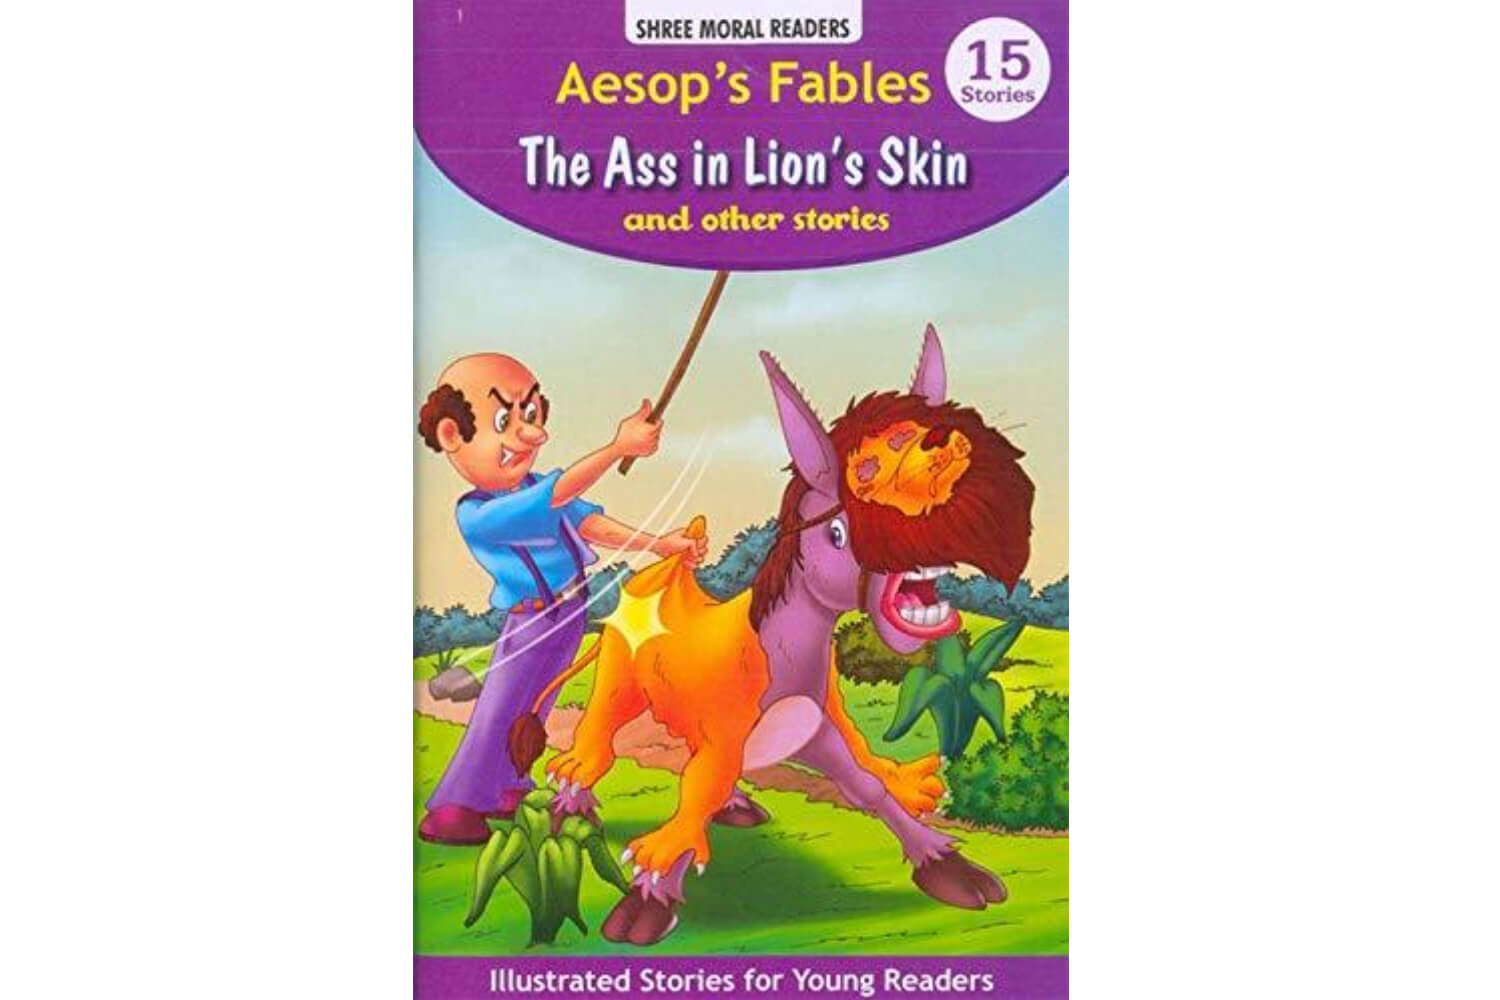 An Ass in Lion’s Skin - short animal stories for kids